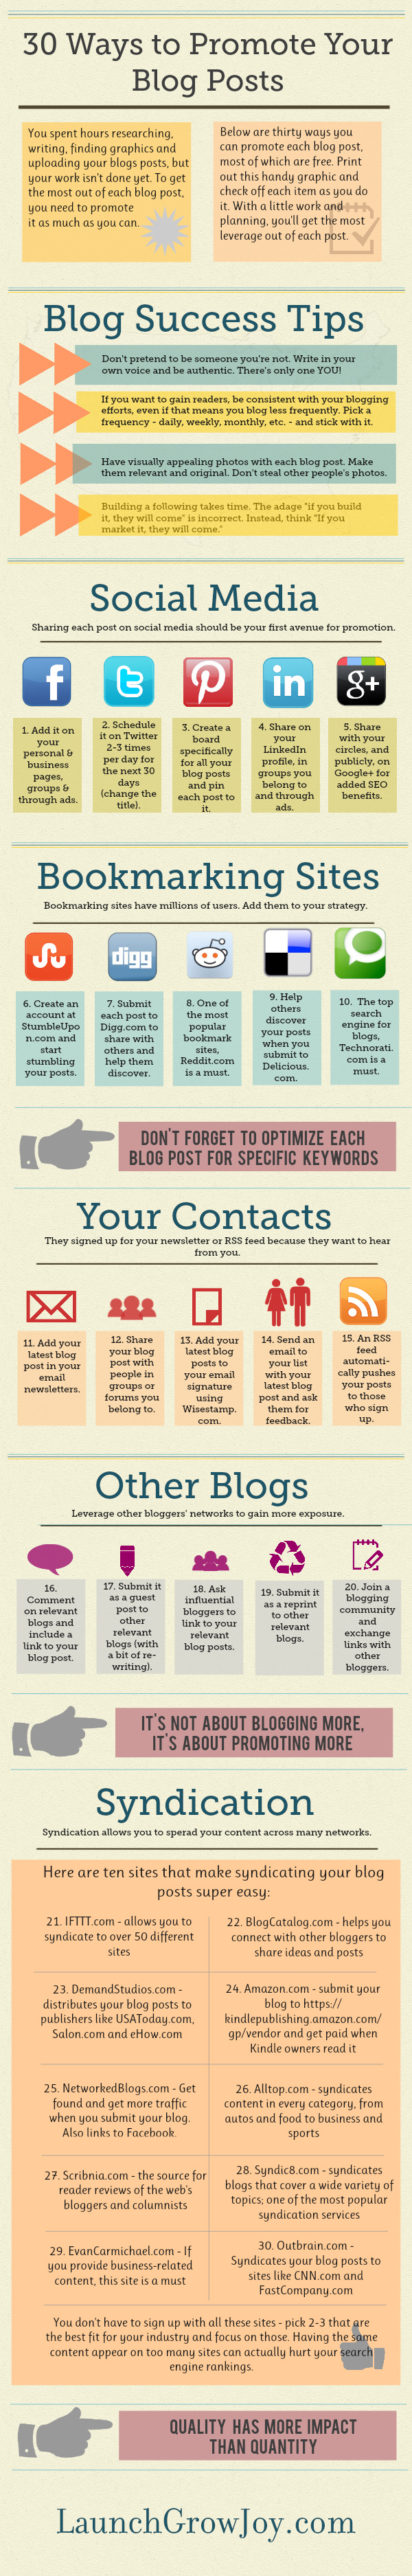 30-ways-to-promote-your-blog-posts1